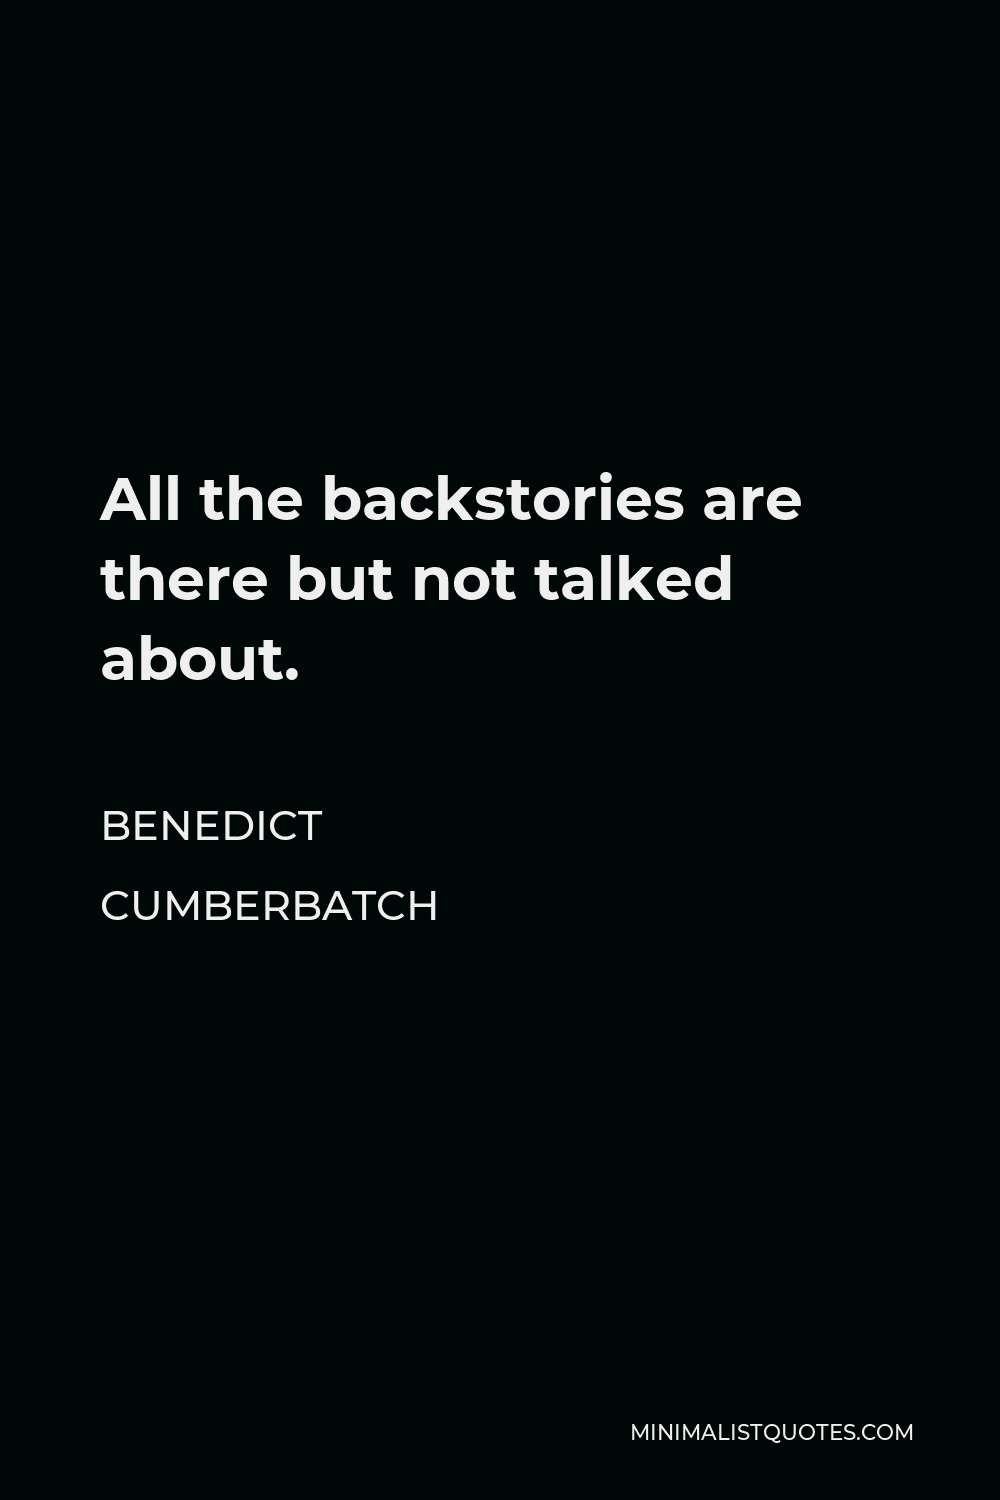 Benedict Cumberbatch Quote - All the backstories are there but not talked about.